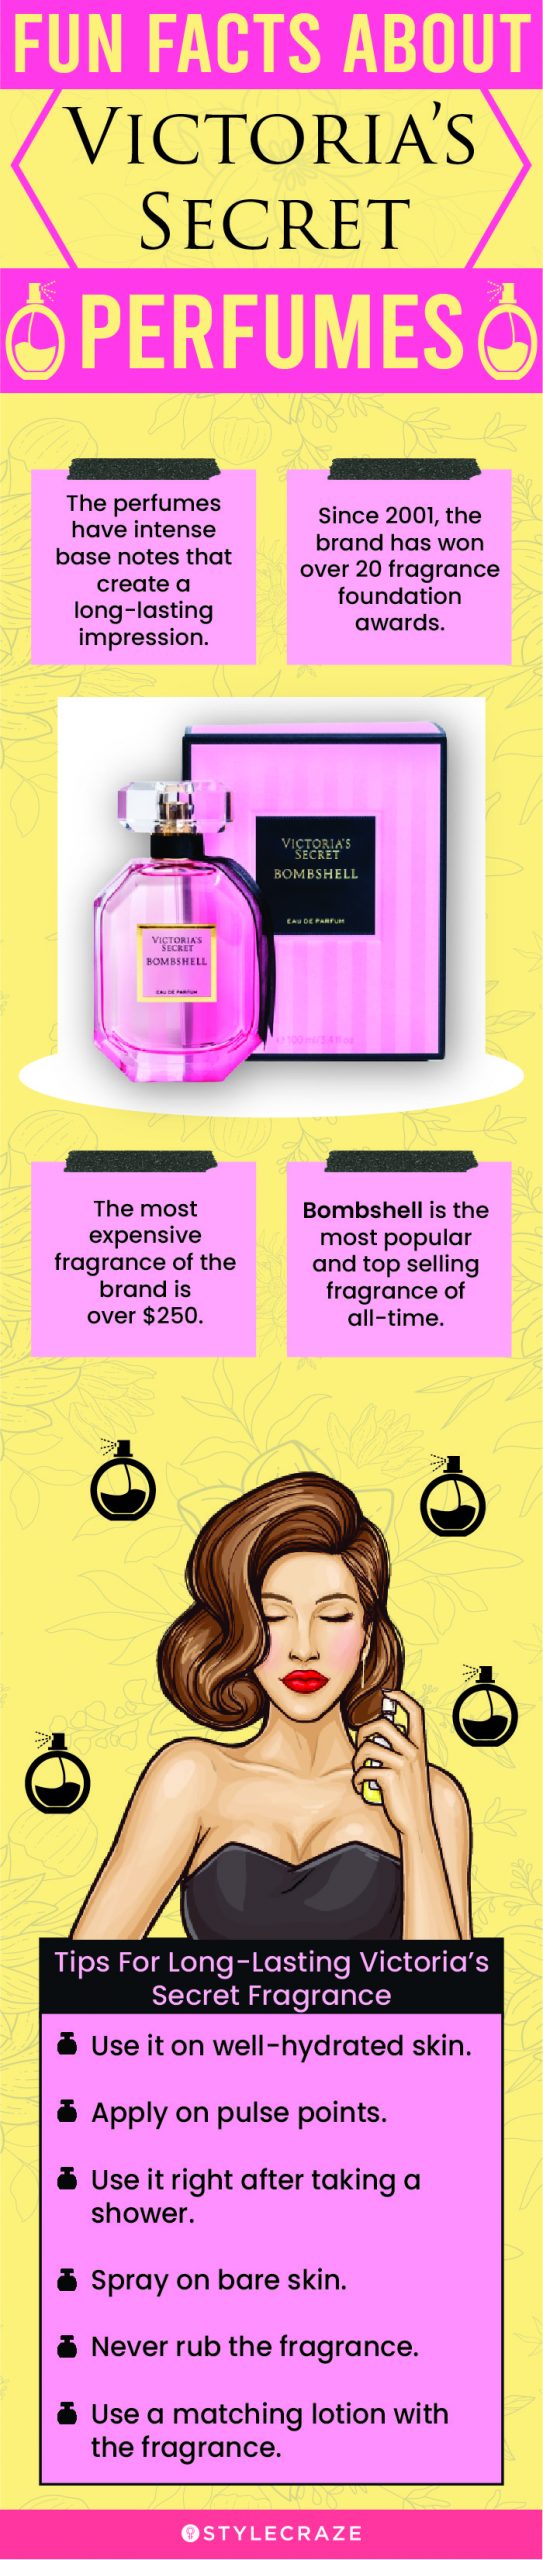 Fun Facts About Victoria's Secret Perfumes (infographic)